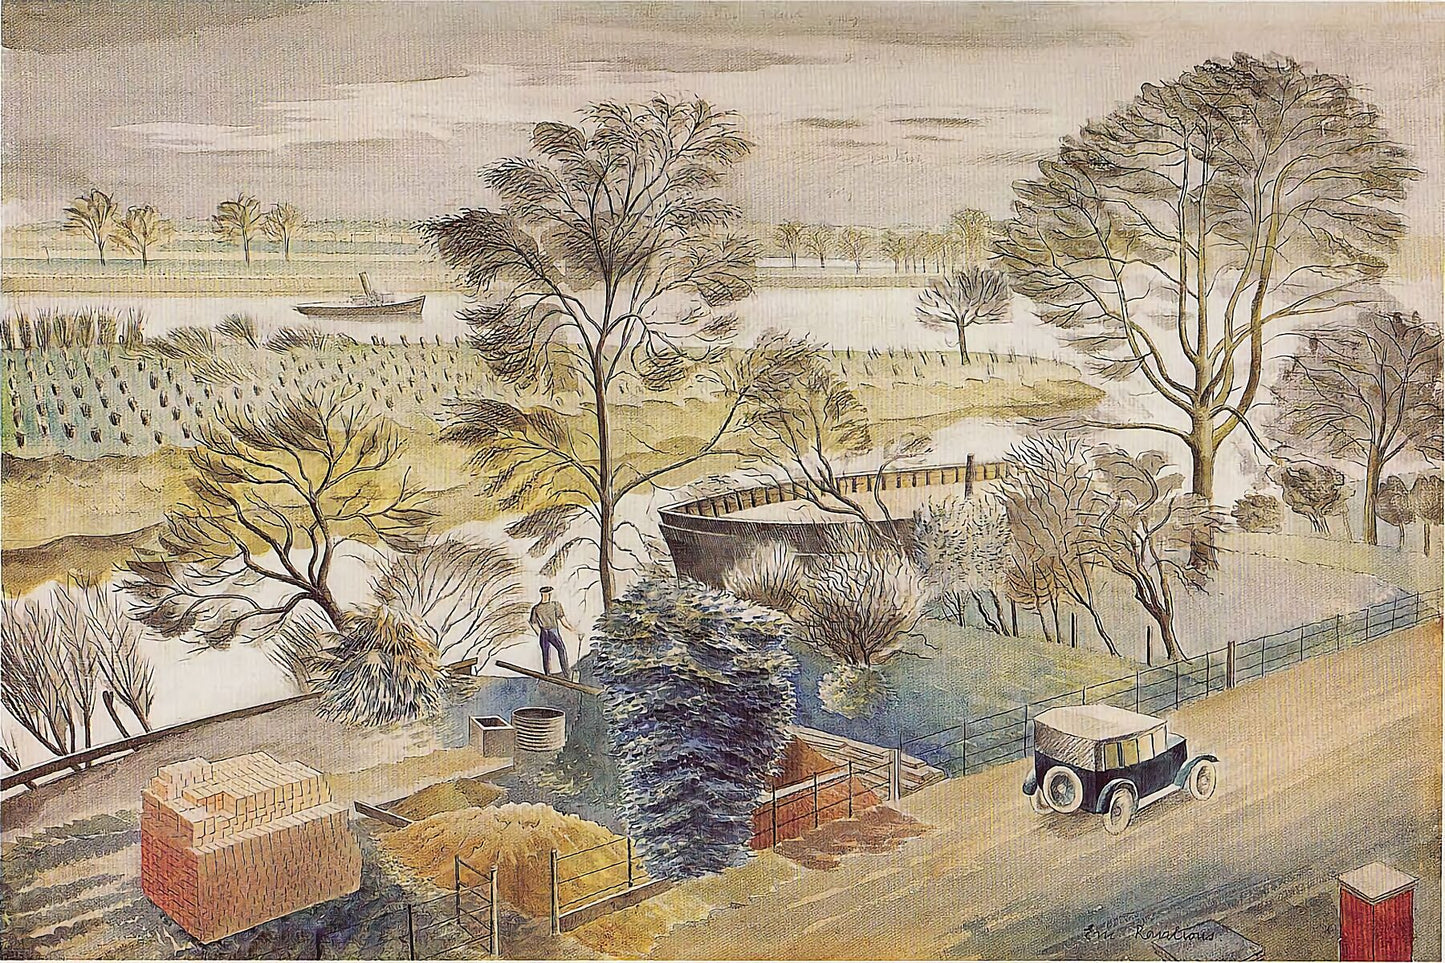 River Thames at Chiswick Eyot by Eric Ravilious - 1933